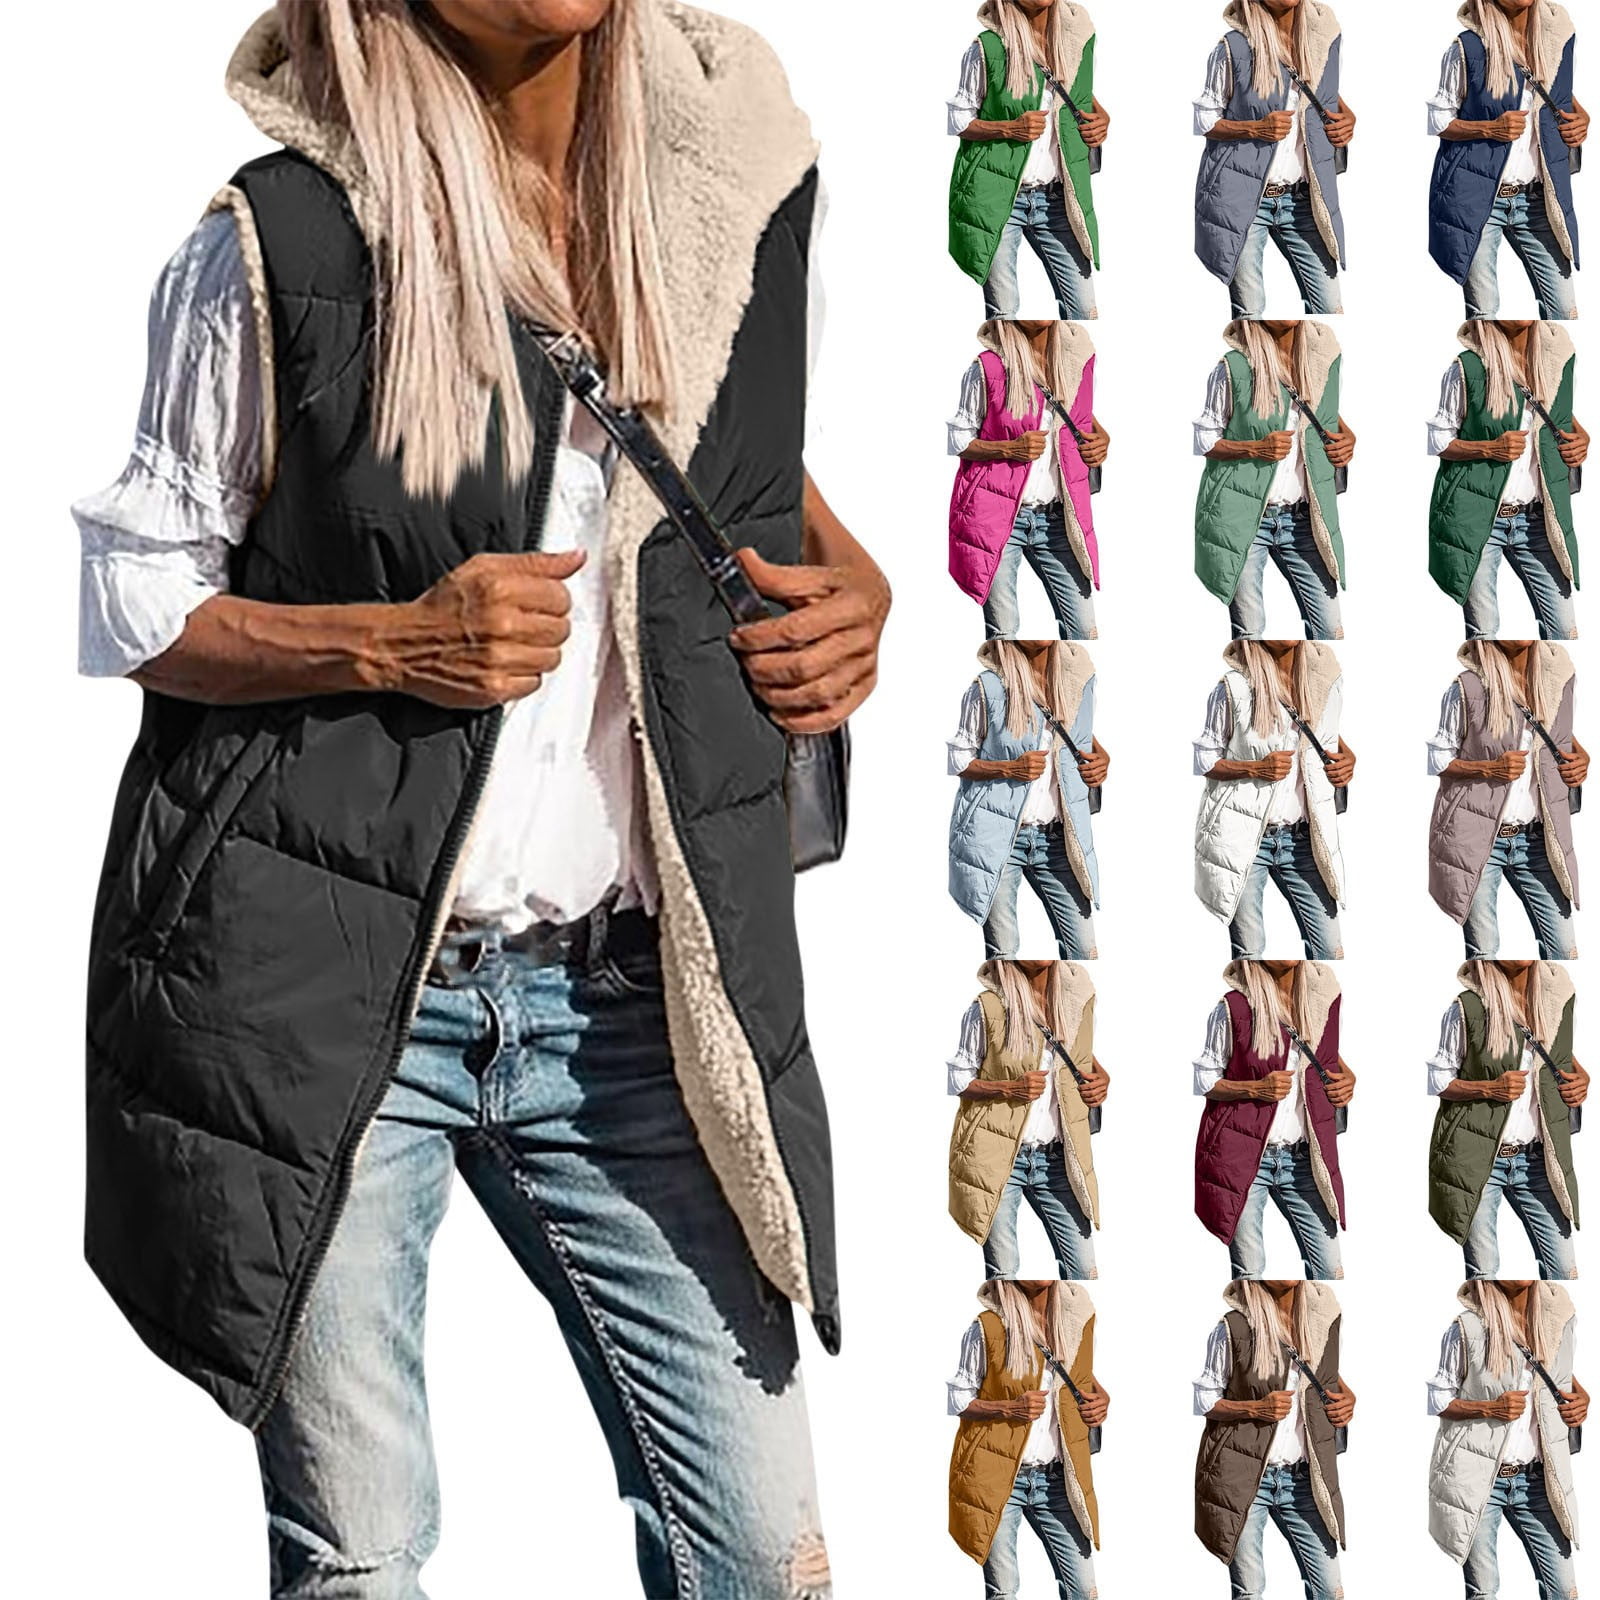 TQWQT Women's Long Quilted Vest Hooded Maxi Length Sleeveless